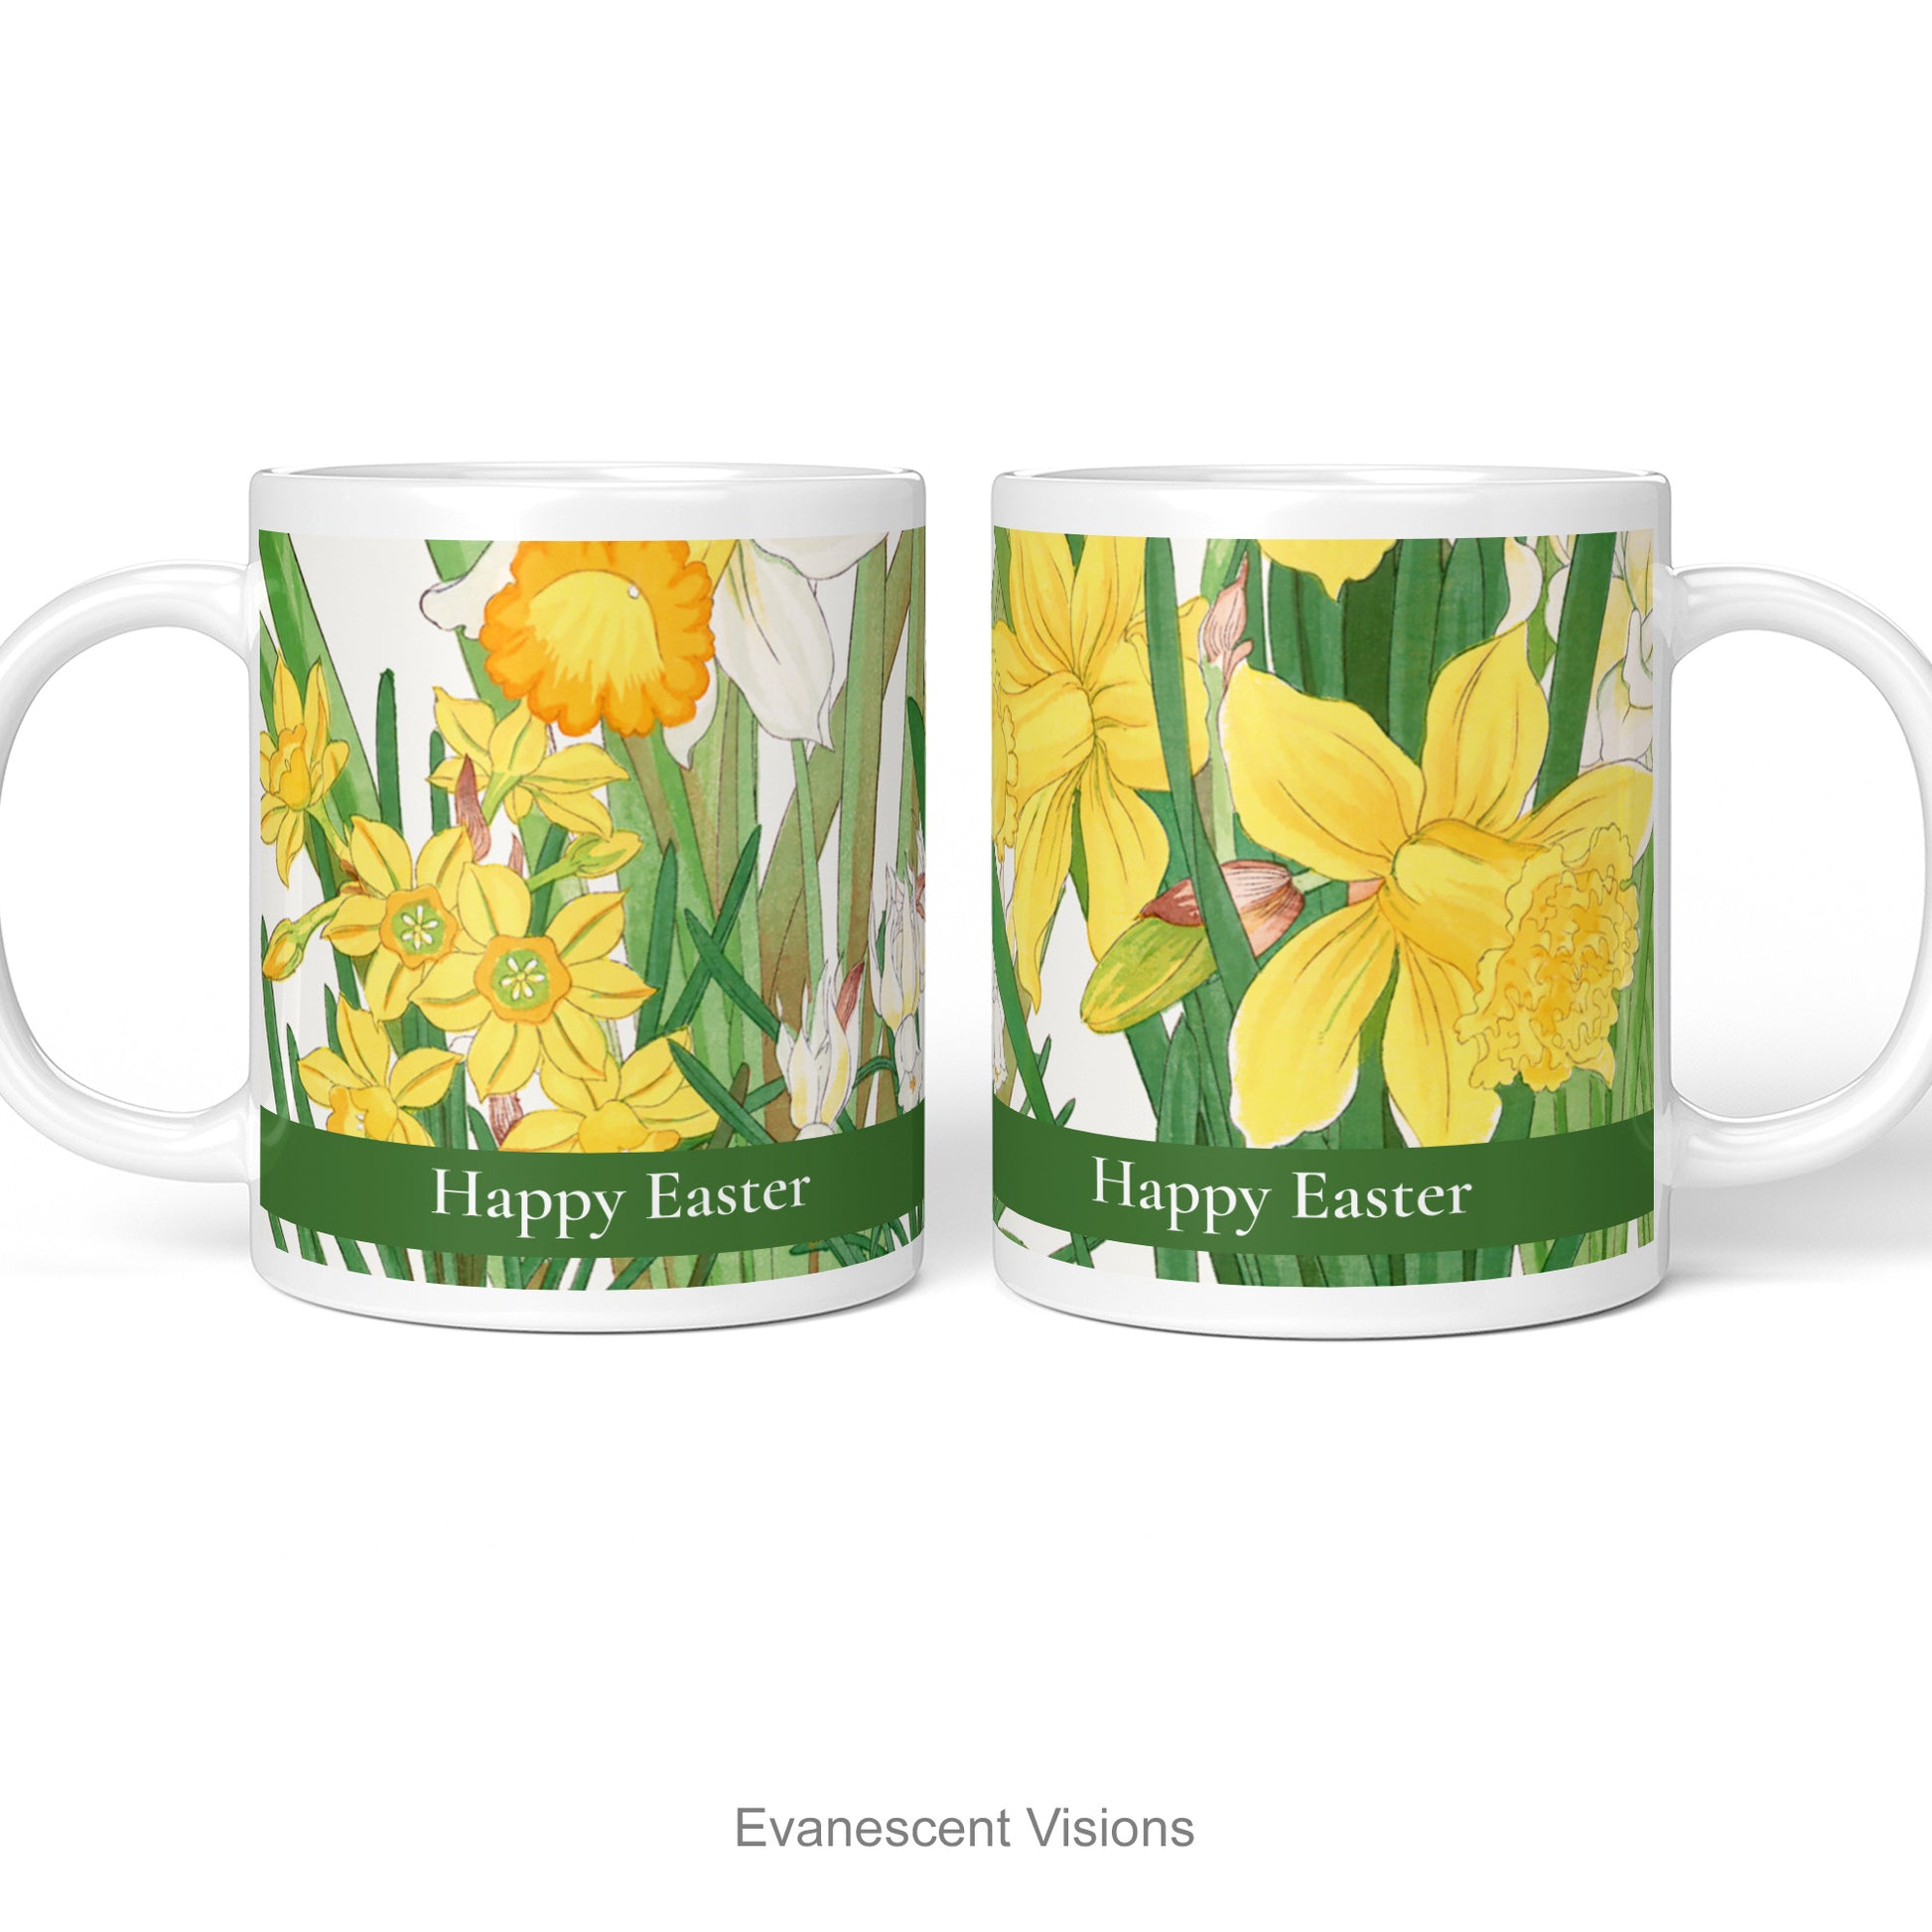 Personalised mug shown on both sides with design from a woodblock painting of Spring Daffodil Flowers by artist Kônan Tanigami (1917-1924)